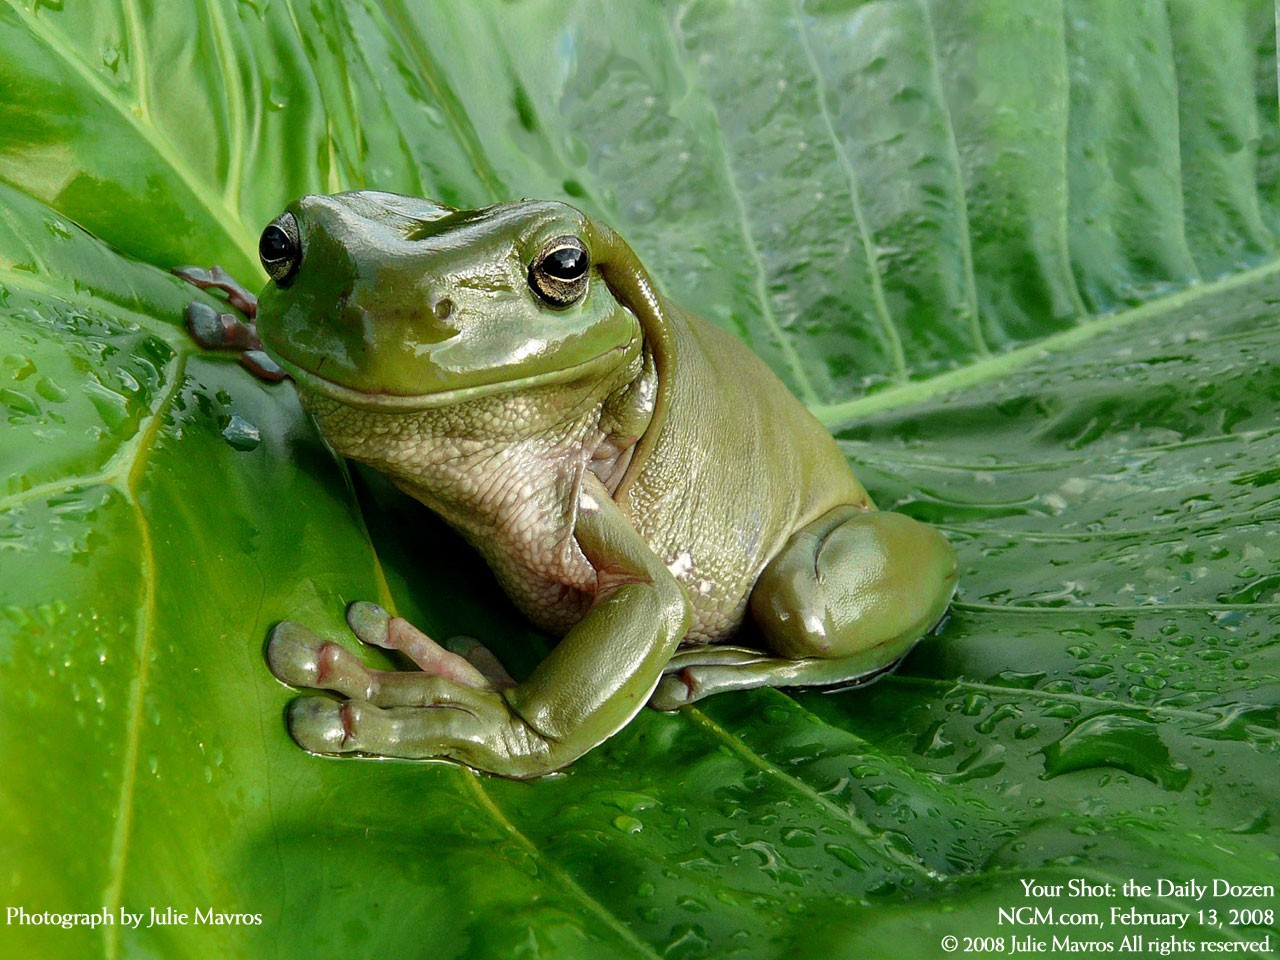 cute frog is a great wallpaper for your computer desktop and laptop